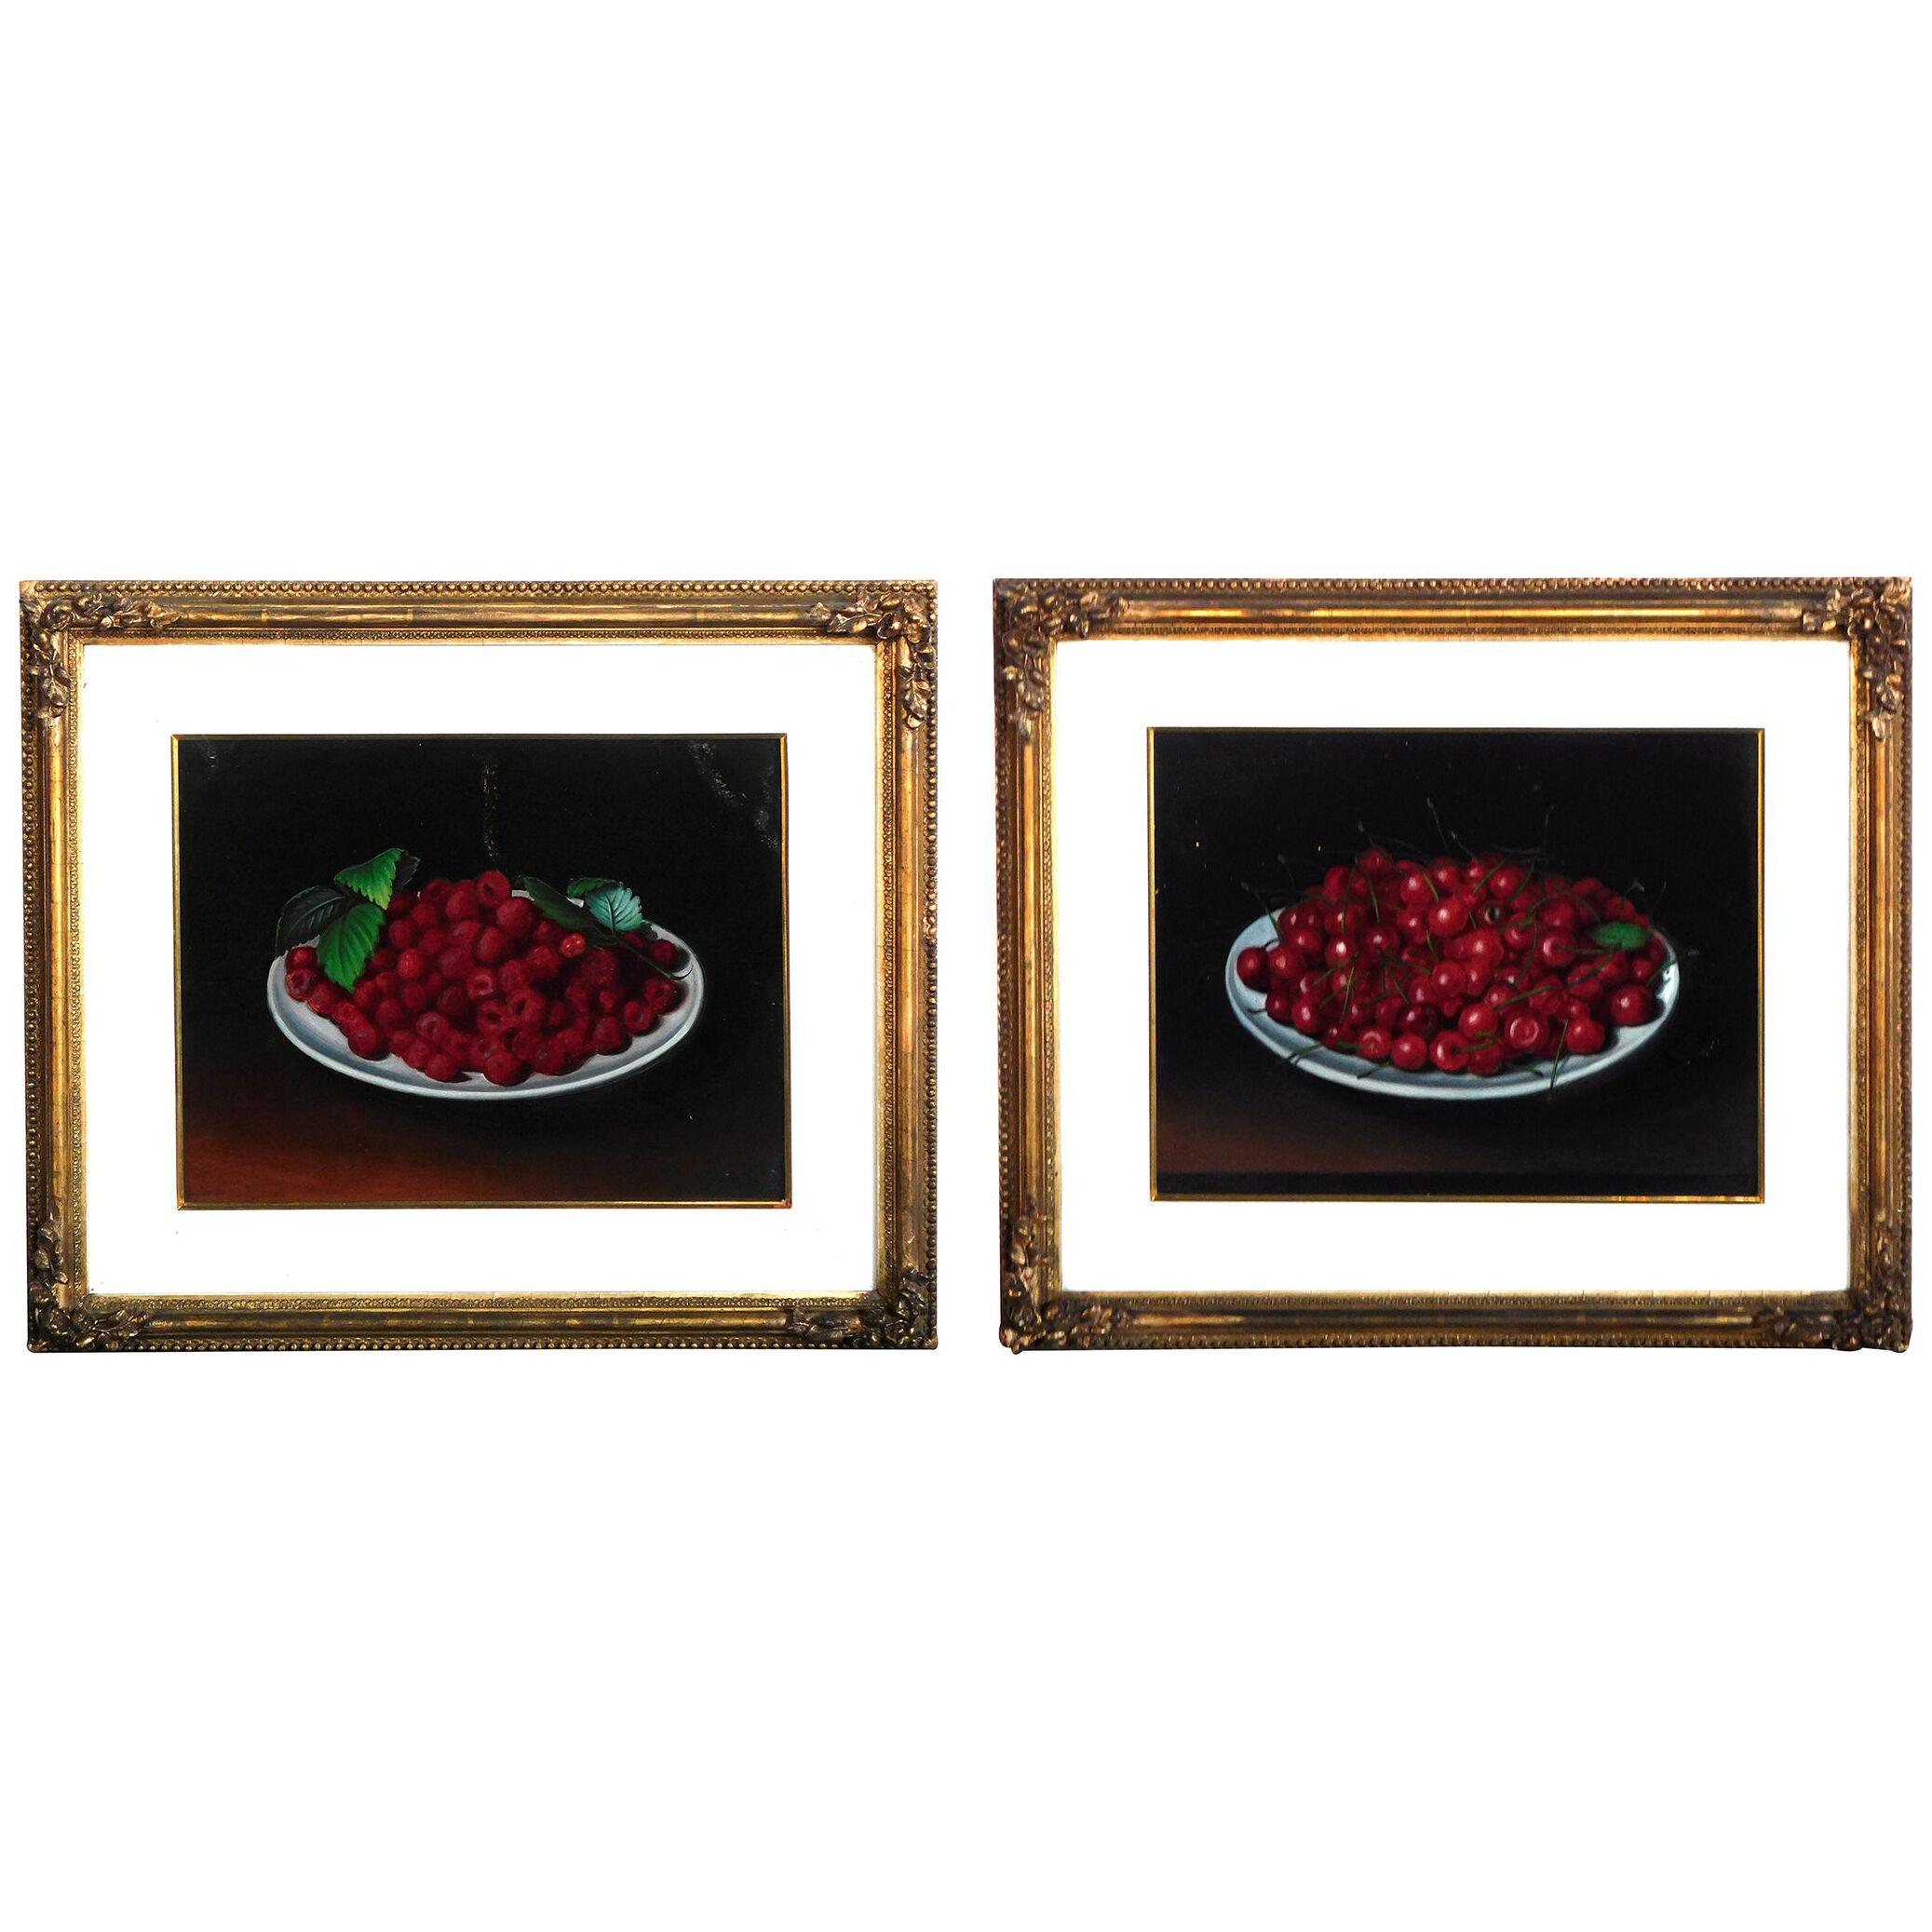 Pair of Victorian still life paintings of a bowl of cherries and red raspberries